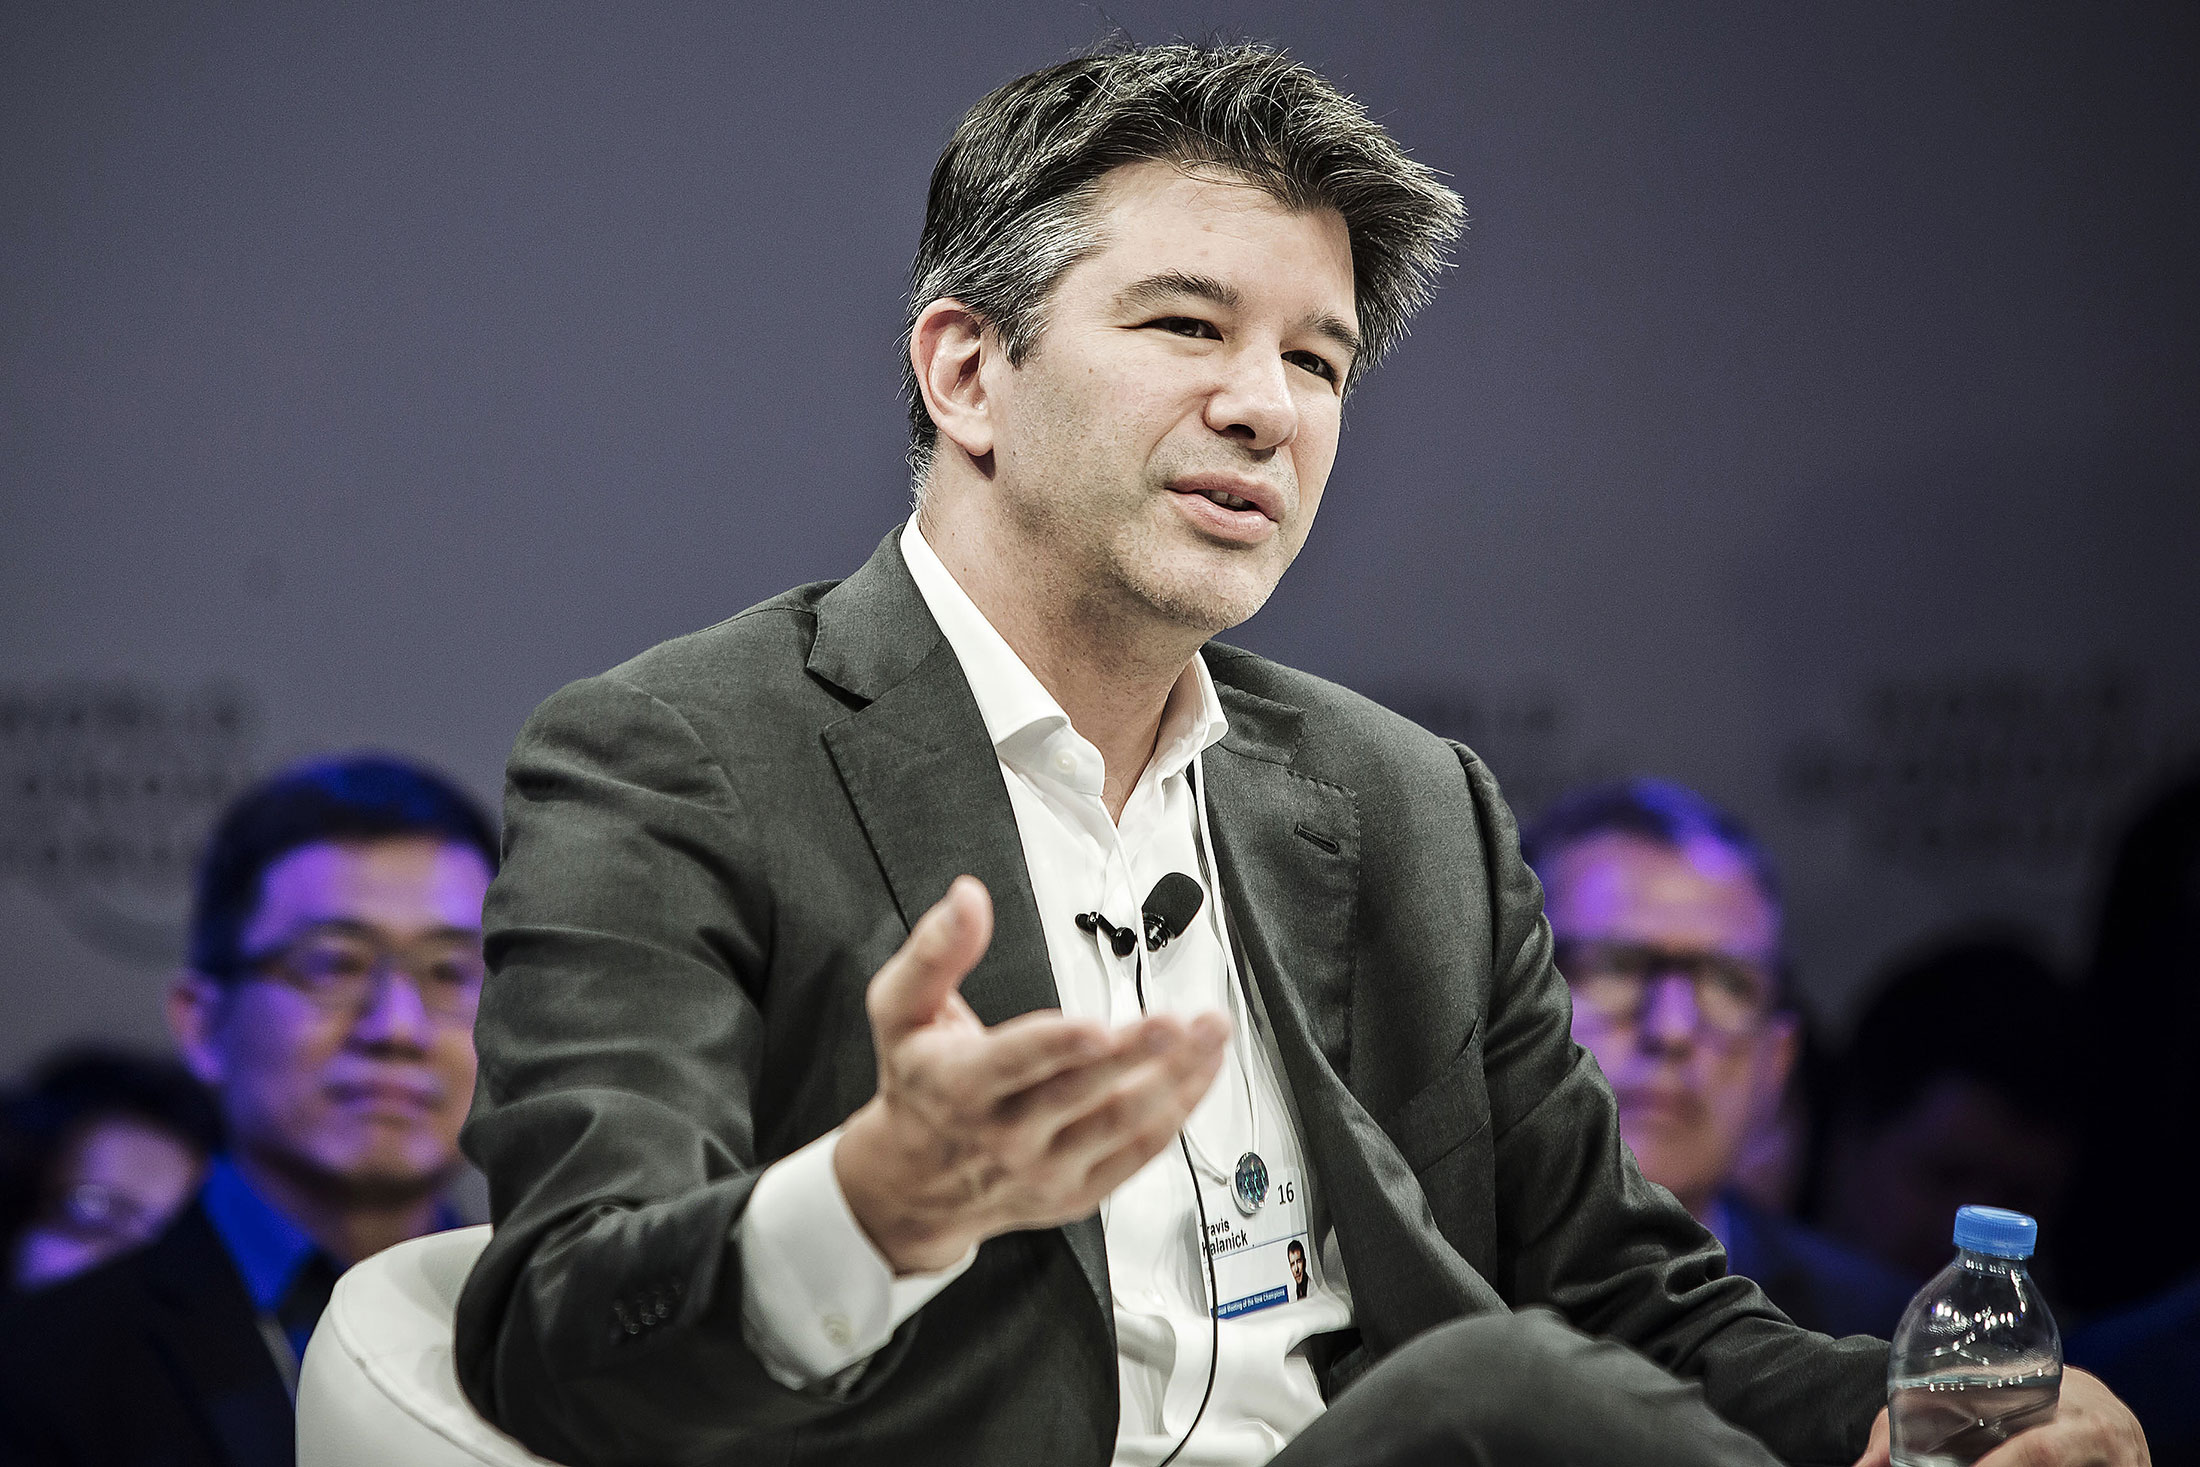 Billionaire Travis Kalanick, chief executive officer of Uber Technologies Inc., speaks during a session at the World Economic Forum (WEF) Annual Meeting of the New Champions in Tianjin, China, on Monday, June 27, 2016. The meeting runs through June 28.
